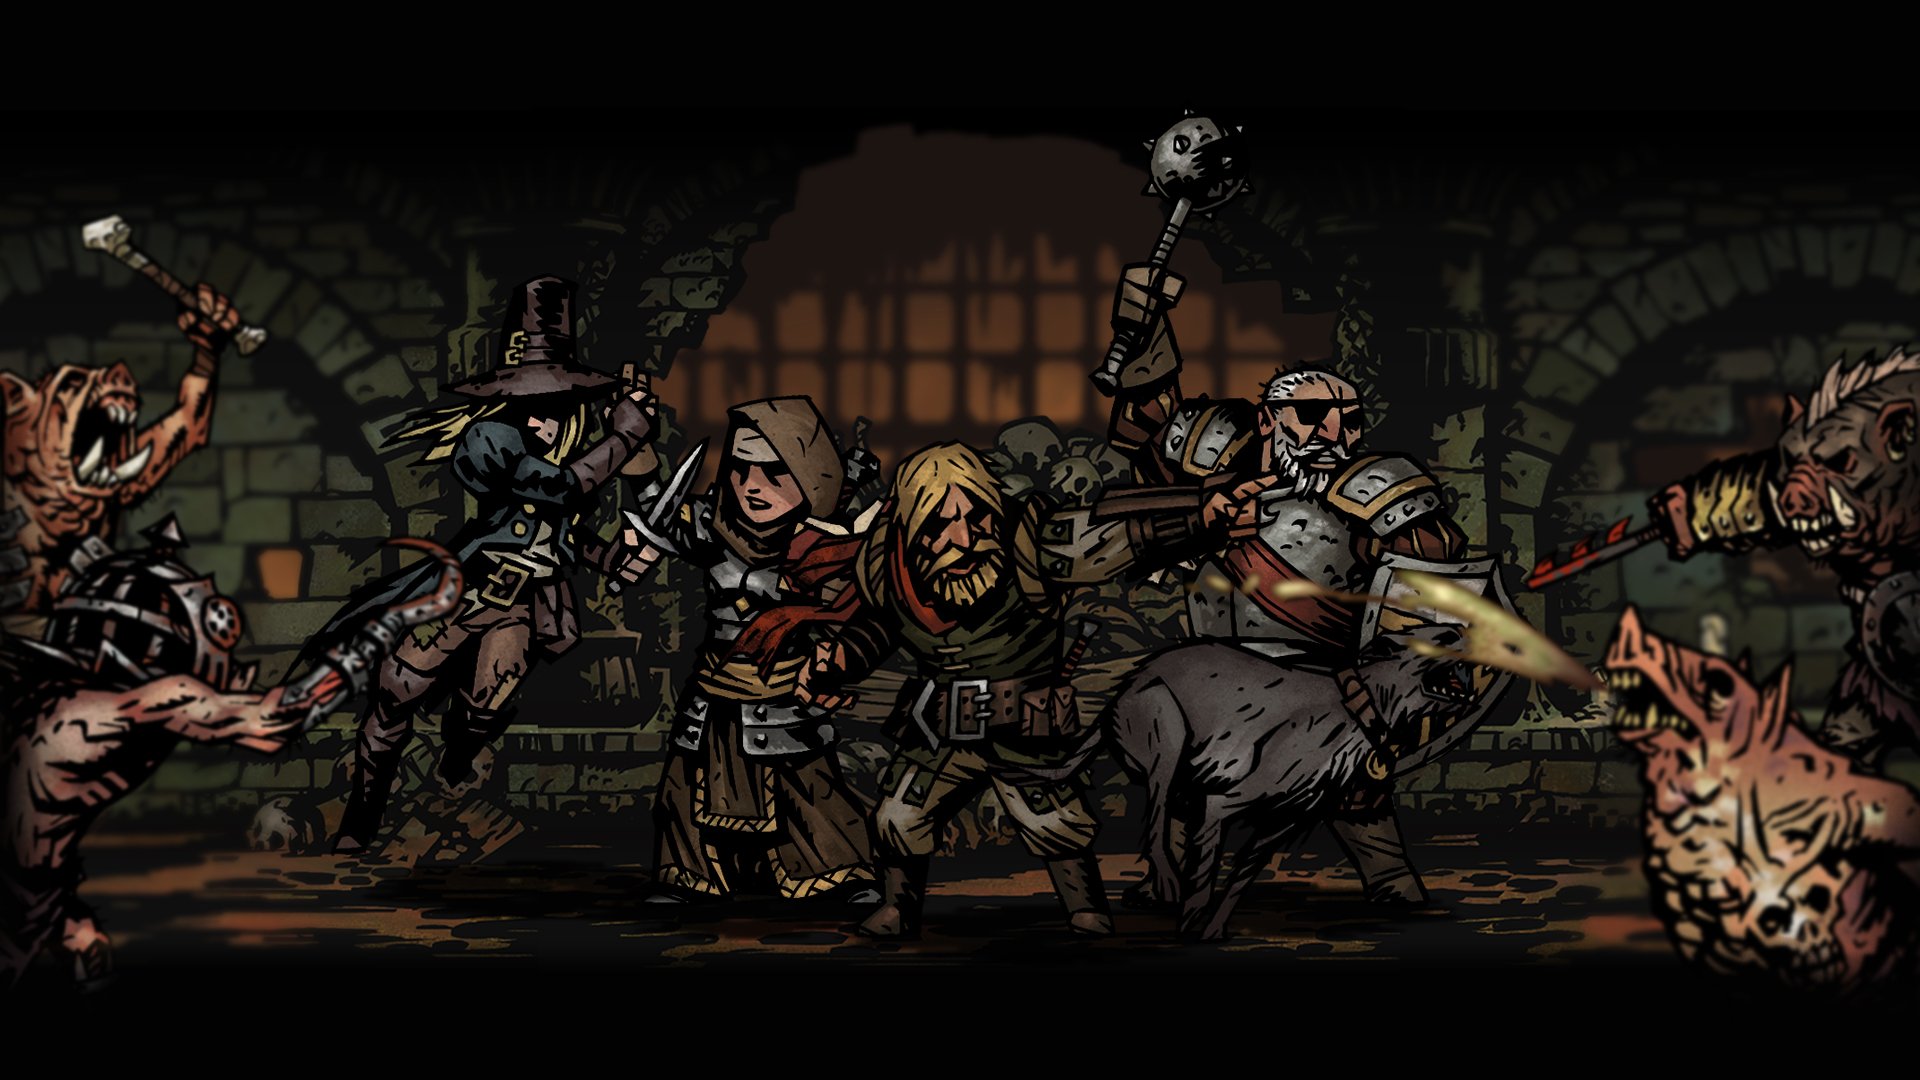 Steam Community Guide Darkest Dungeon Full HD Wallpapers for 1920x1080